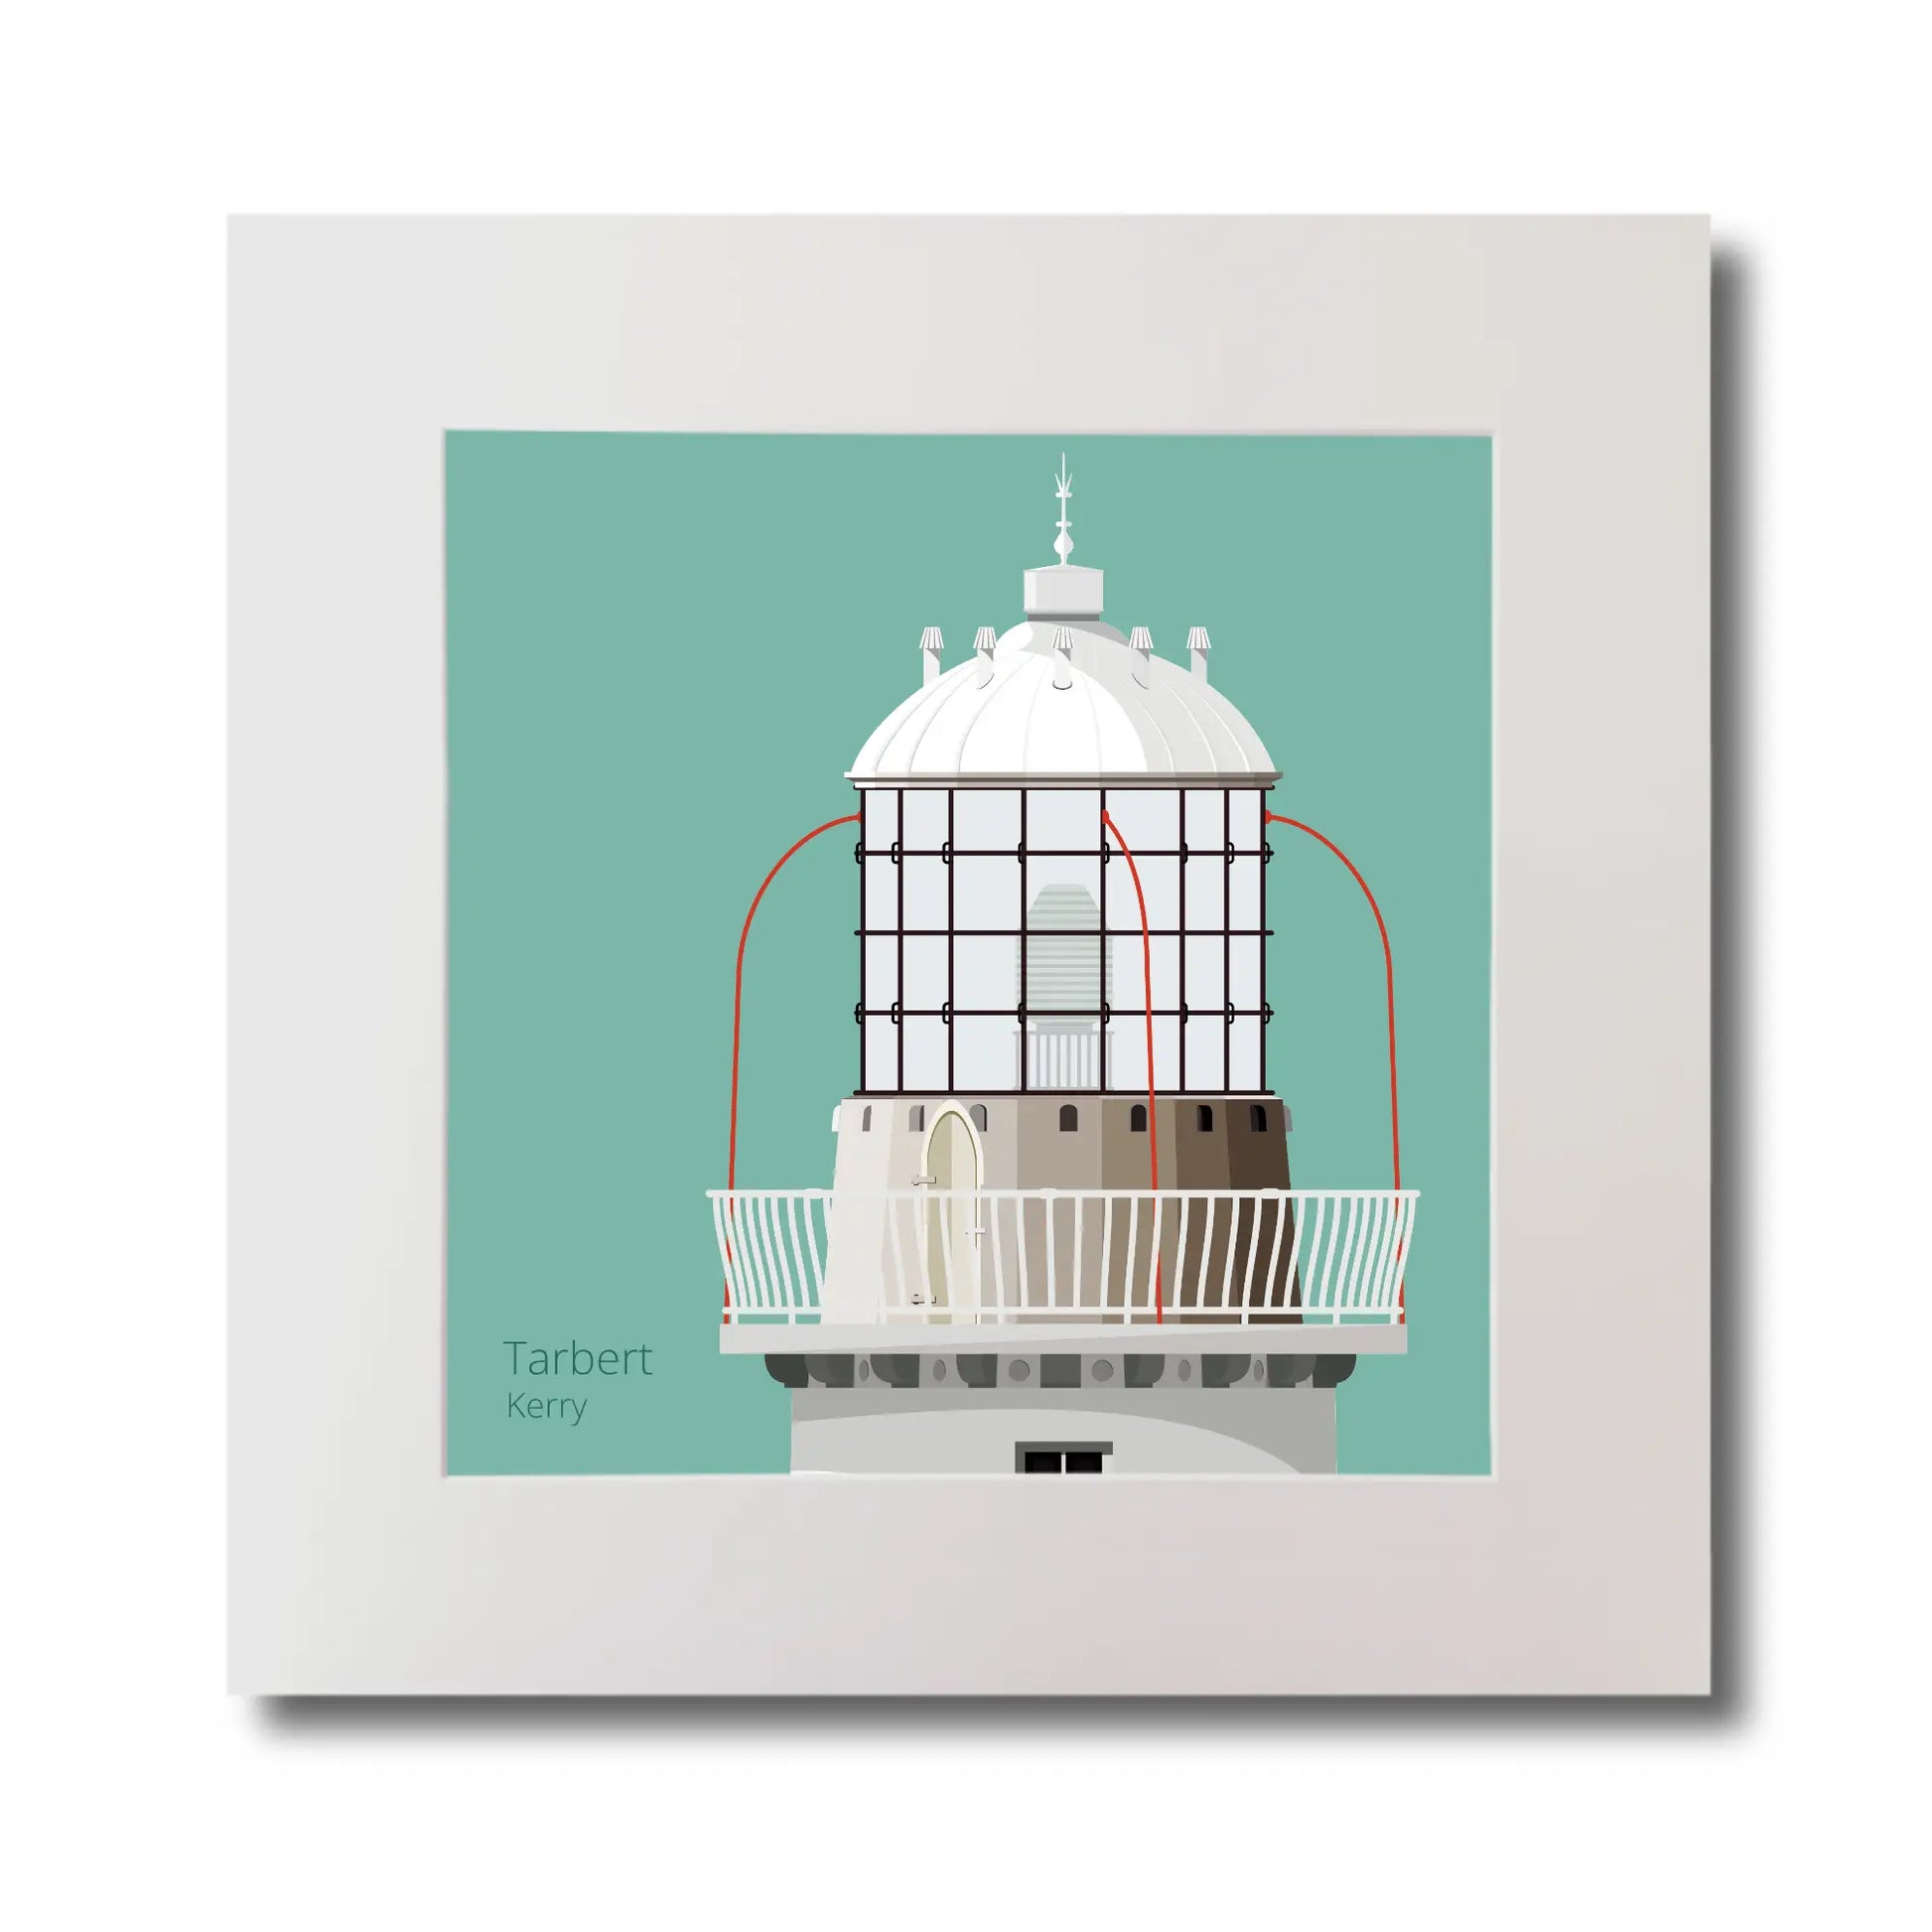 Illustration Tarbert lighthouse on an ocean green background, mounted and measuring 30x30cm.